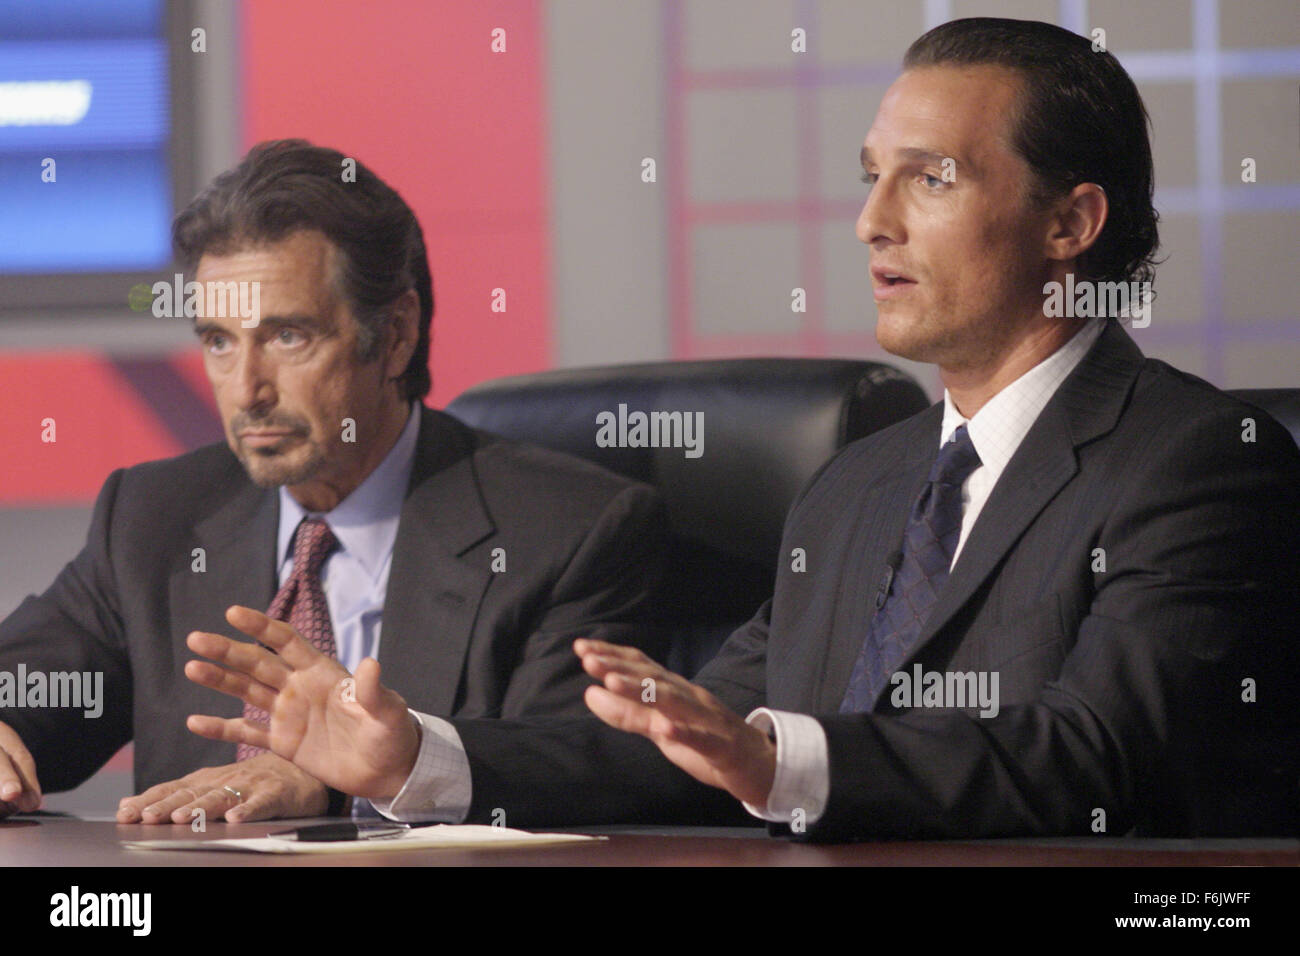 RELEASE DATE: October 7, 2005. MOVIE TITLE: Two for the Money. STUDIO: Universal Pictures. PLOT: After suffering a career-ending injury, a former college football star aligns himself with one of the most renowned touts in the sports-gambling business. PICTURED: AL PACINO as Sports gambling impresario Walter Abraham and MATTHEW MCCONAUGHEY as Brandon Lang. Stock Photo